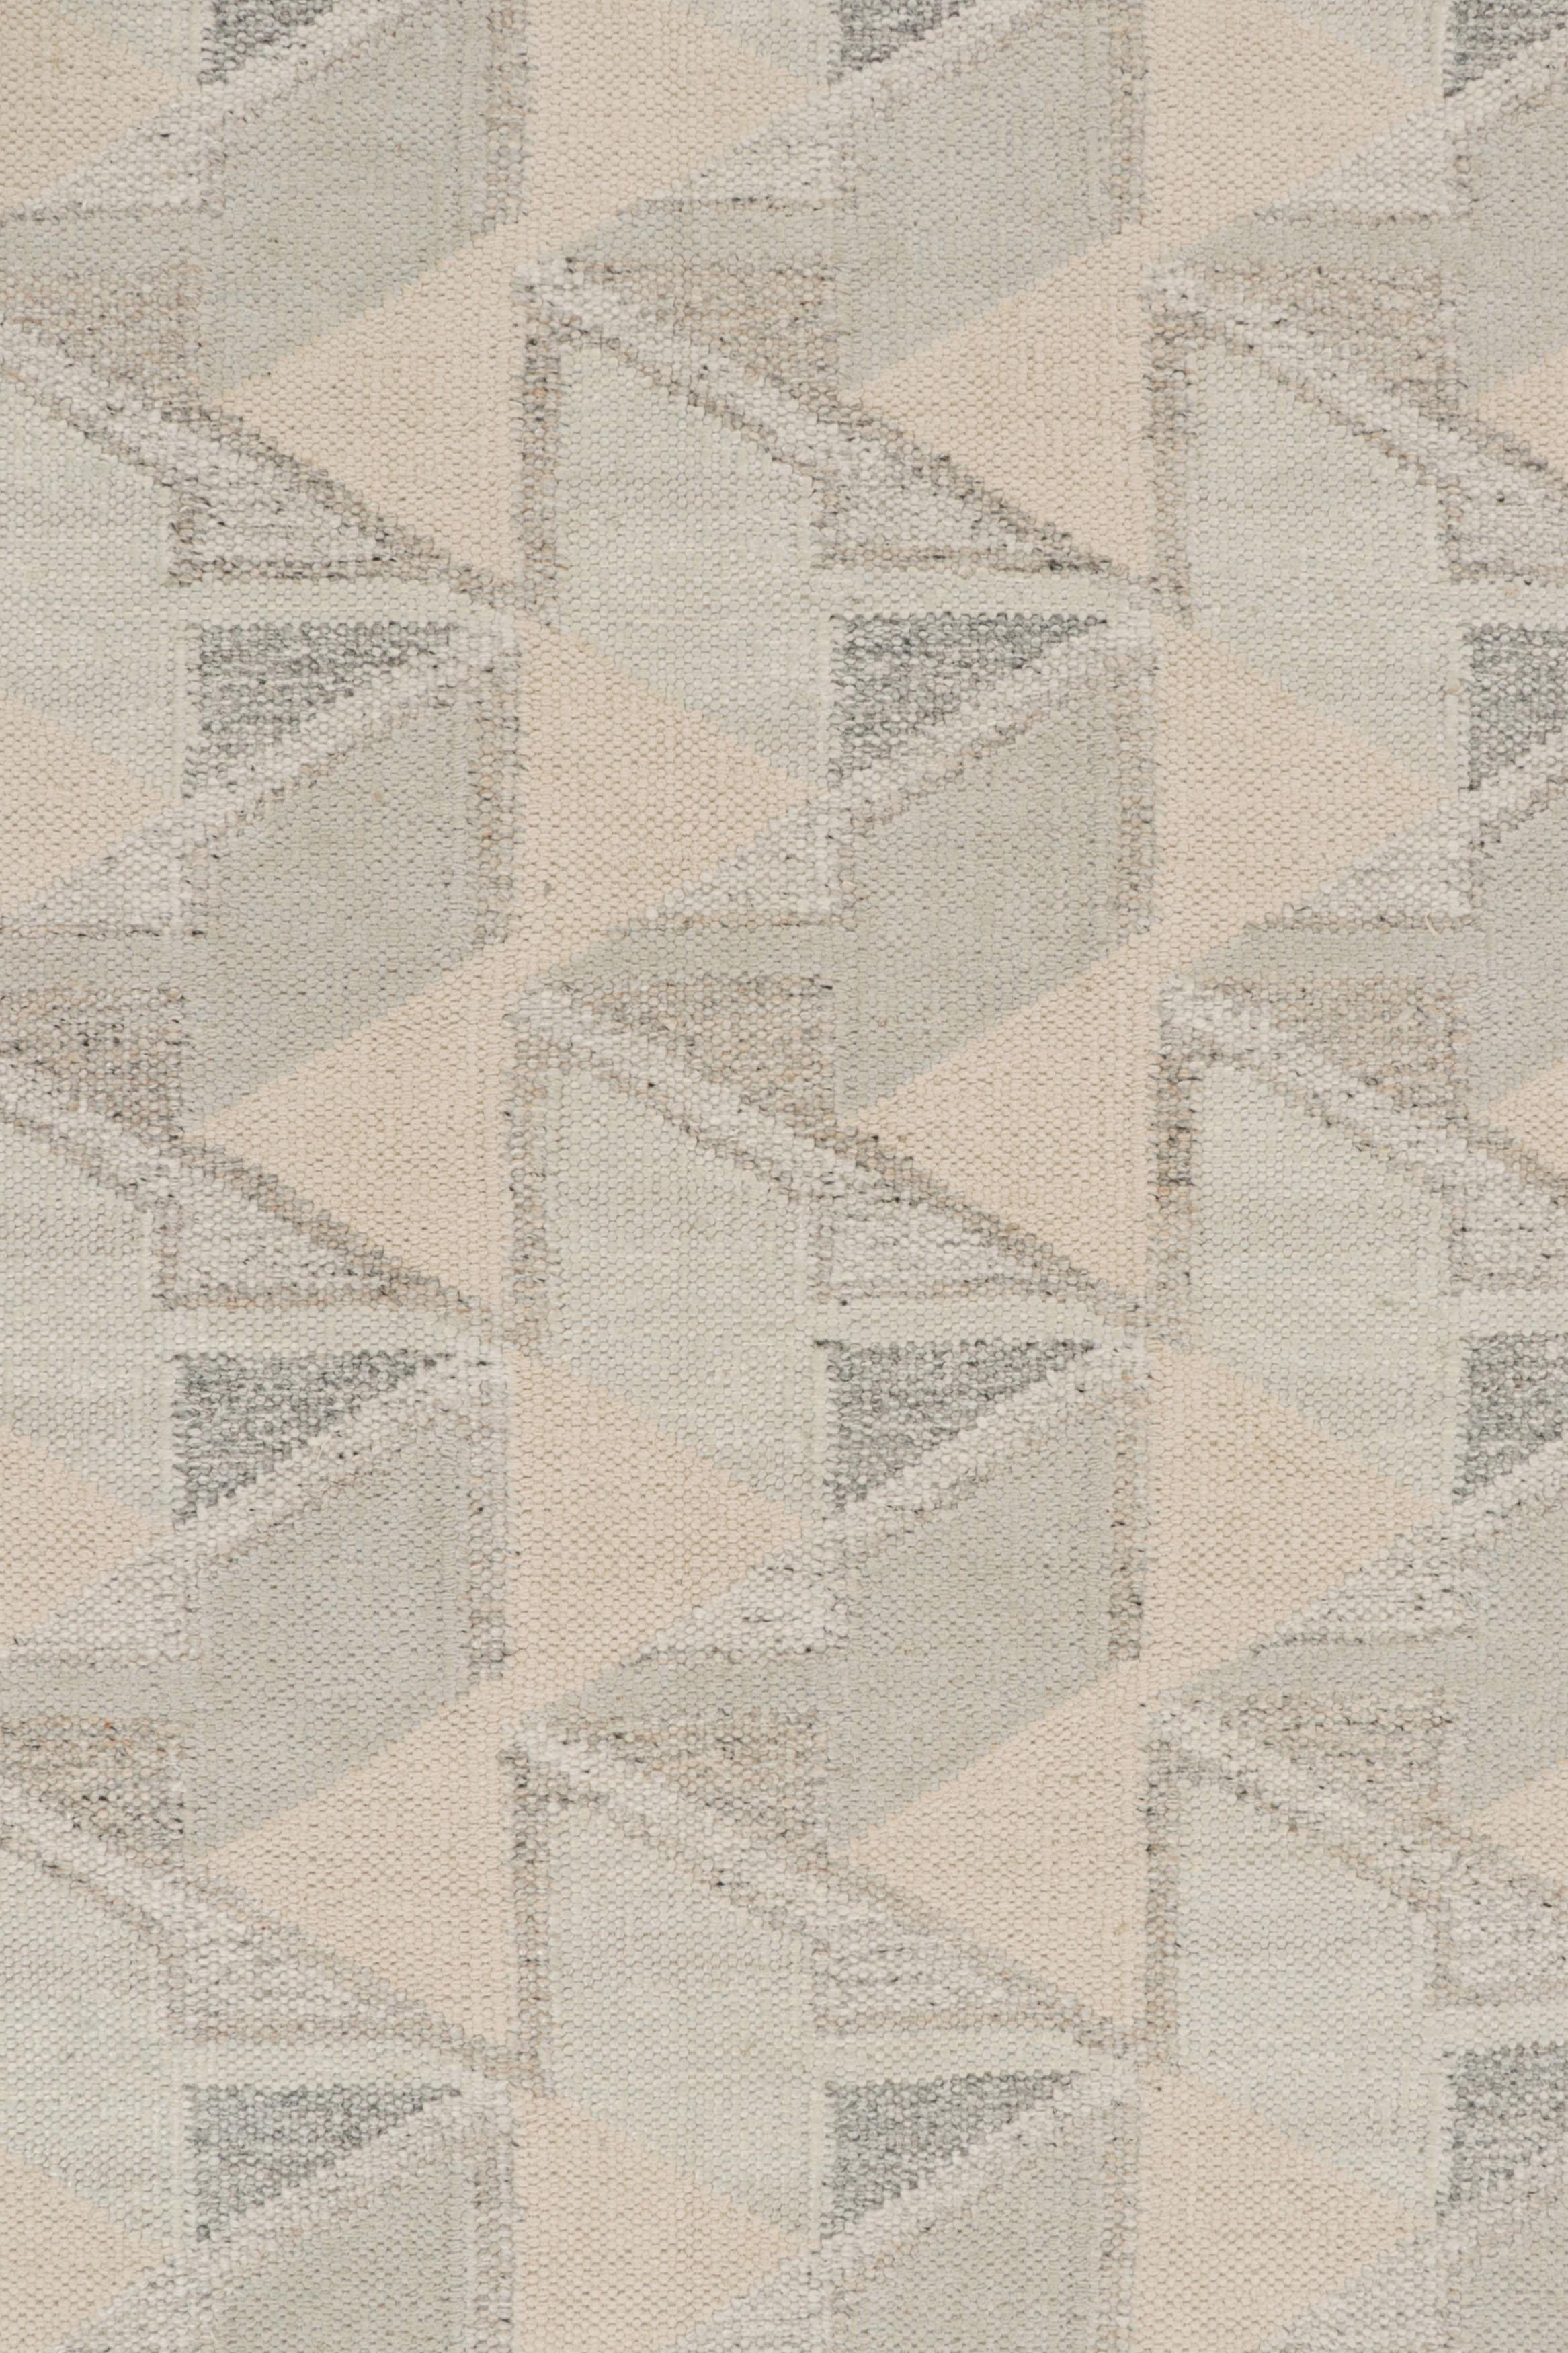 Hand-Knotted Rug & Kilim’s Scandinavian Style Kilim in gray, Beige, White Patterns For Sale